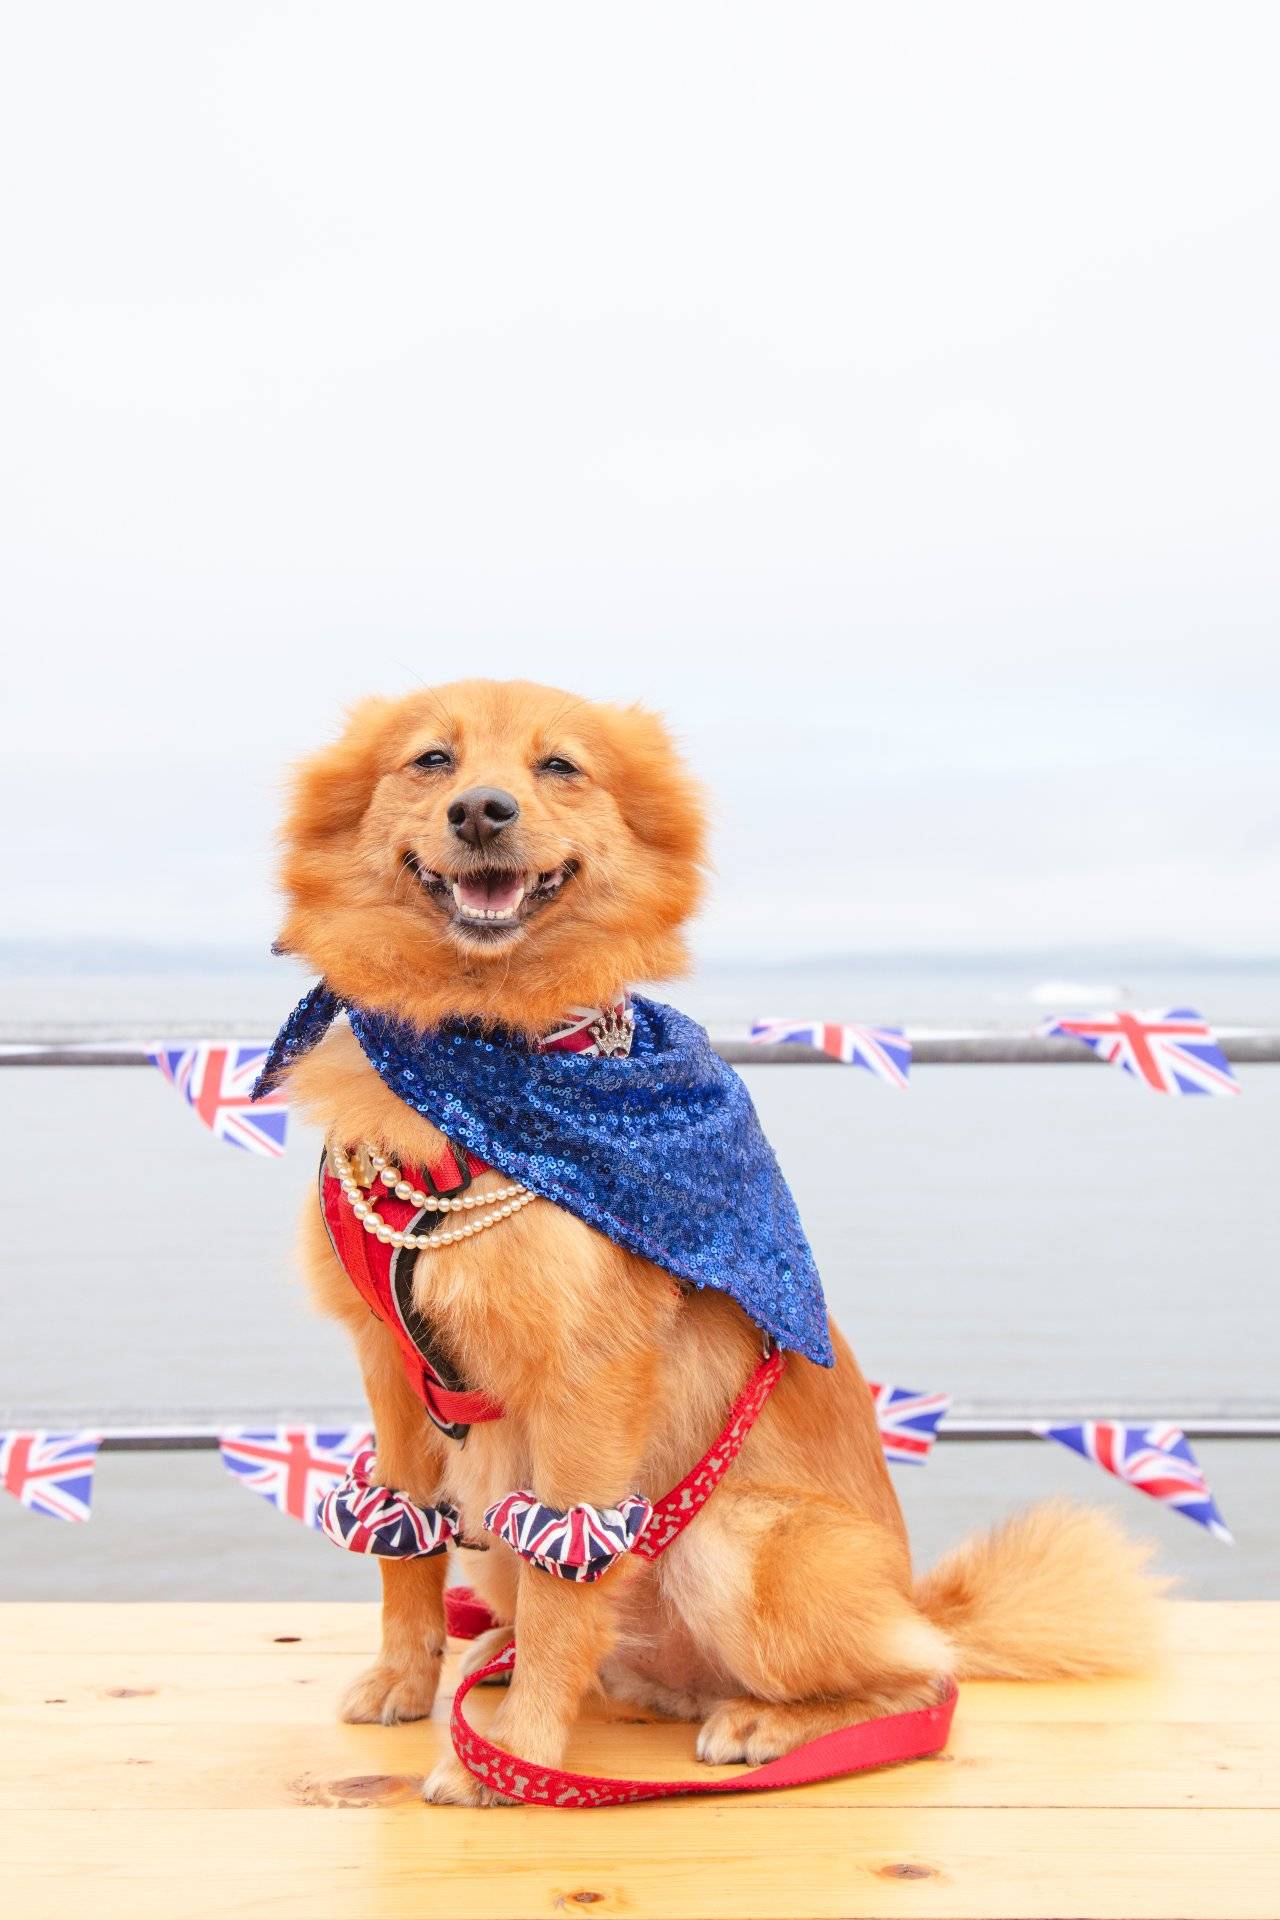 Large fluffy dog adorned with bunting, looking very cheerful